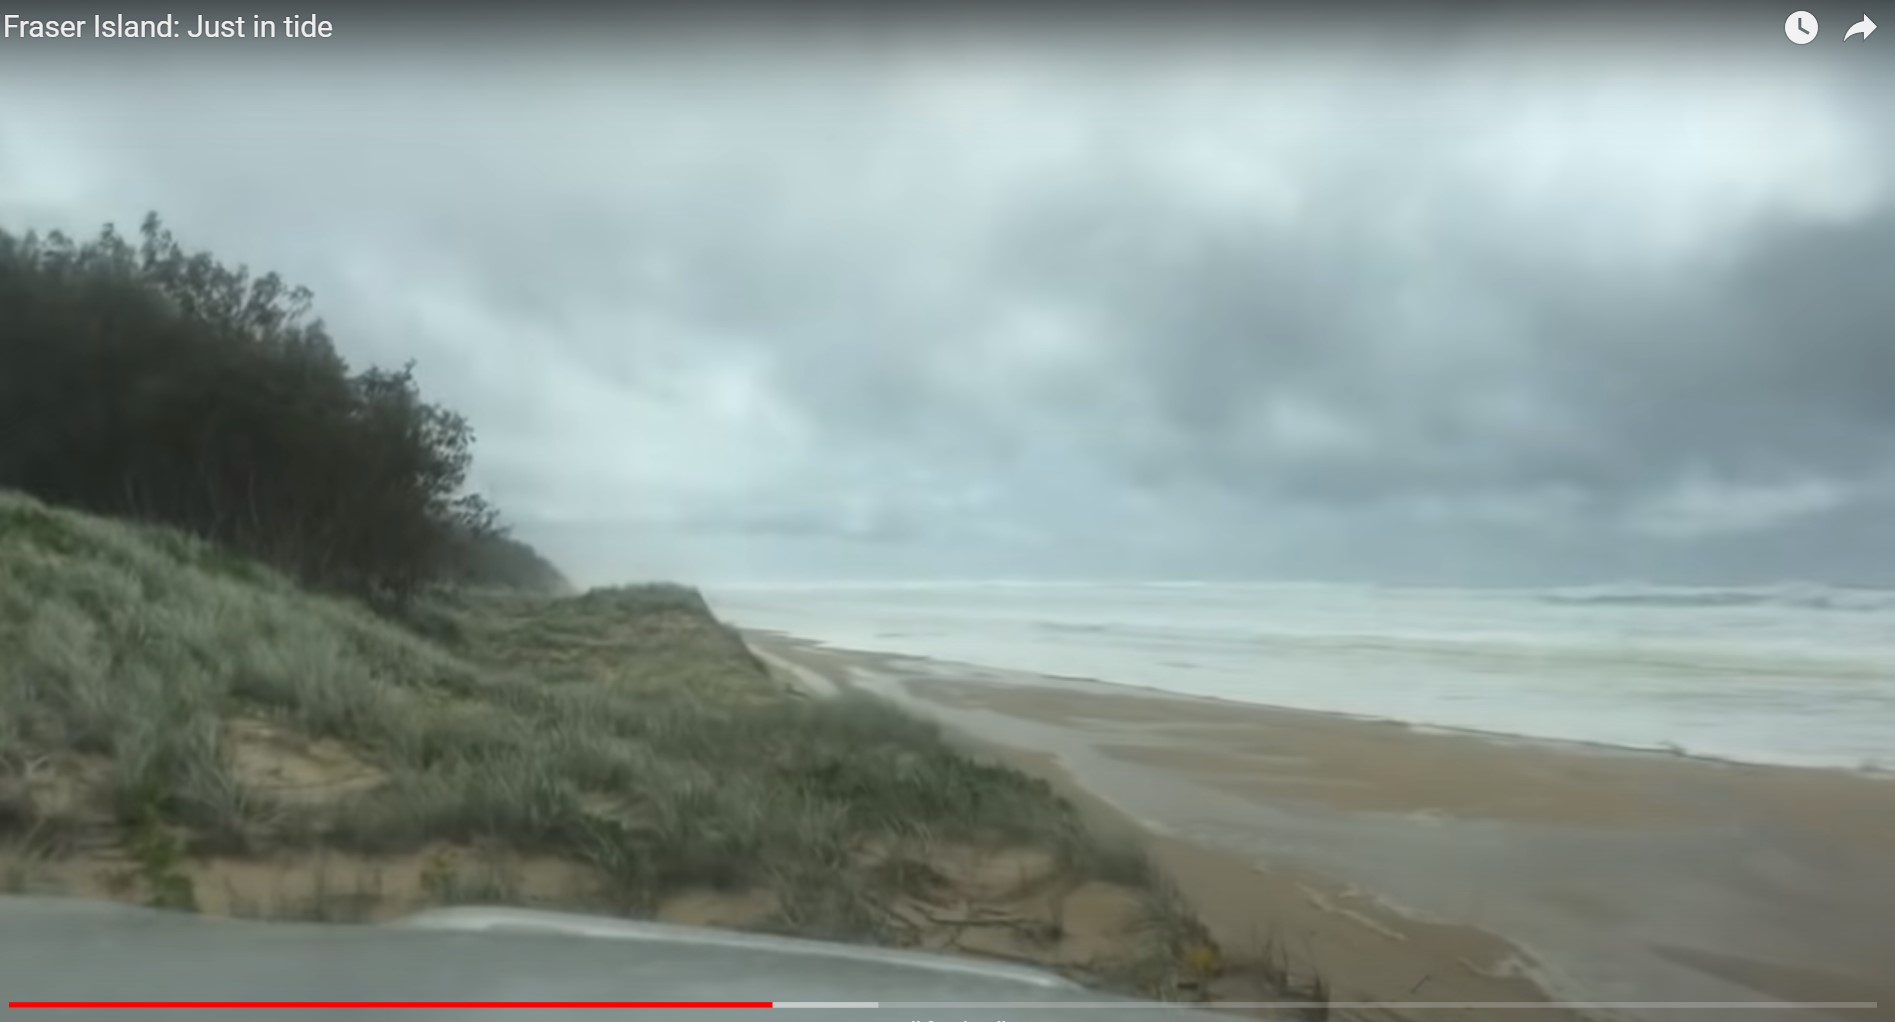 Here’s what’s wrong with the DCS Fraser Island “tide escape” video